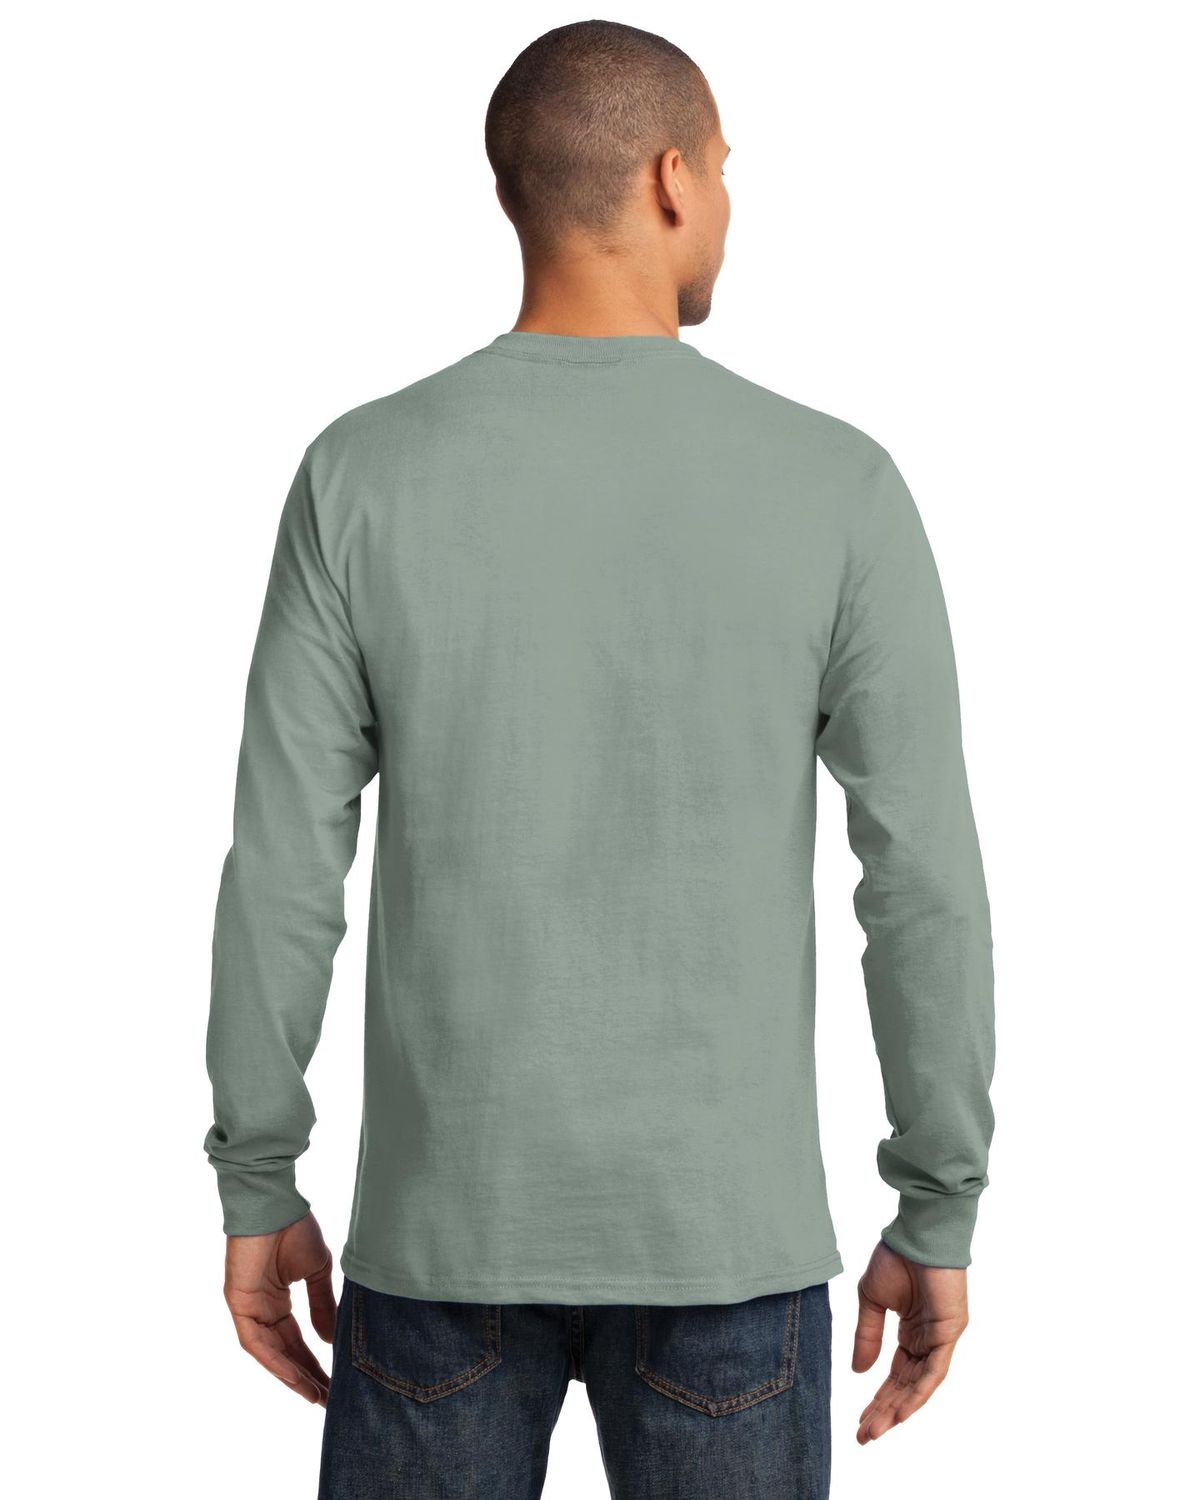 'Port & Company PC61LST Men’s Tall Long Sleeve Essential T-Shirt'